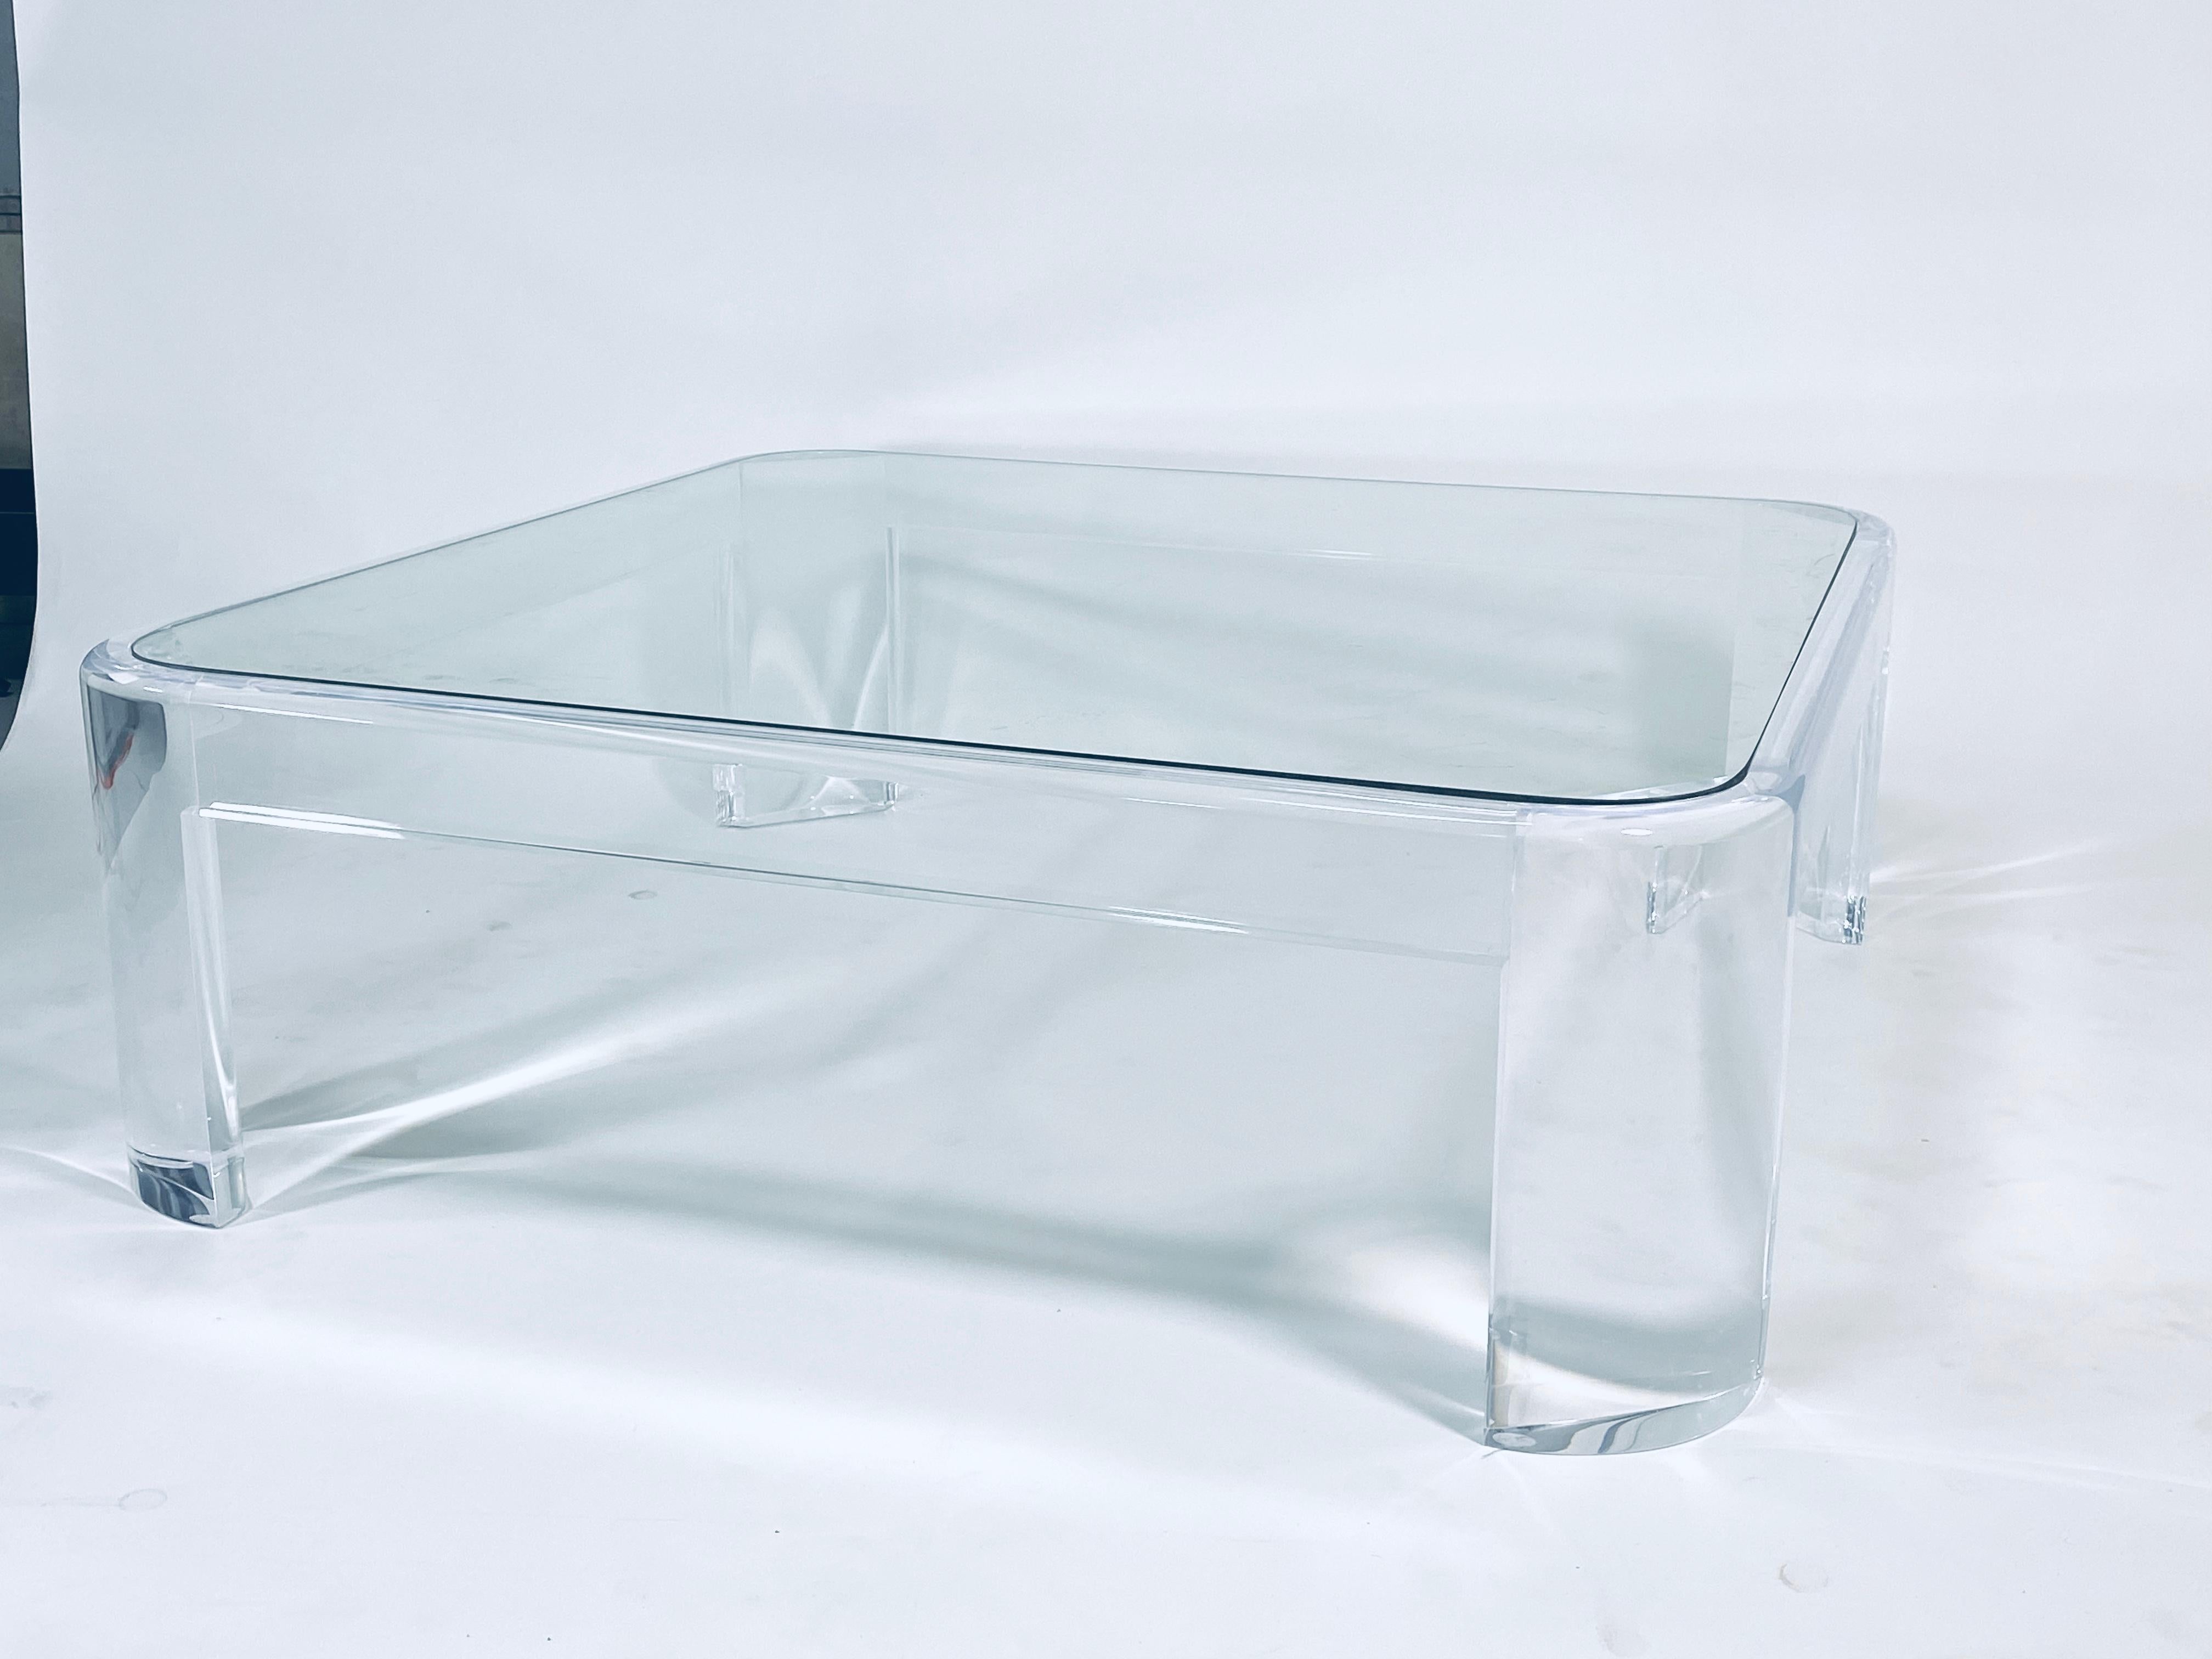 Thick lucite coffee table with rounded radius corners and flush mounted glass top by Les Prismatiques, circa 1970s.